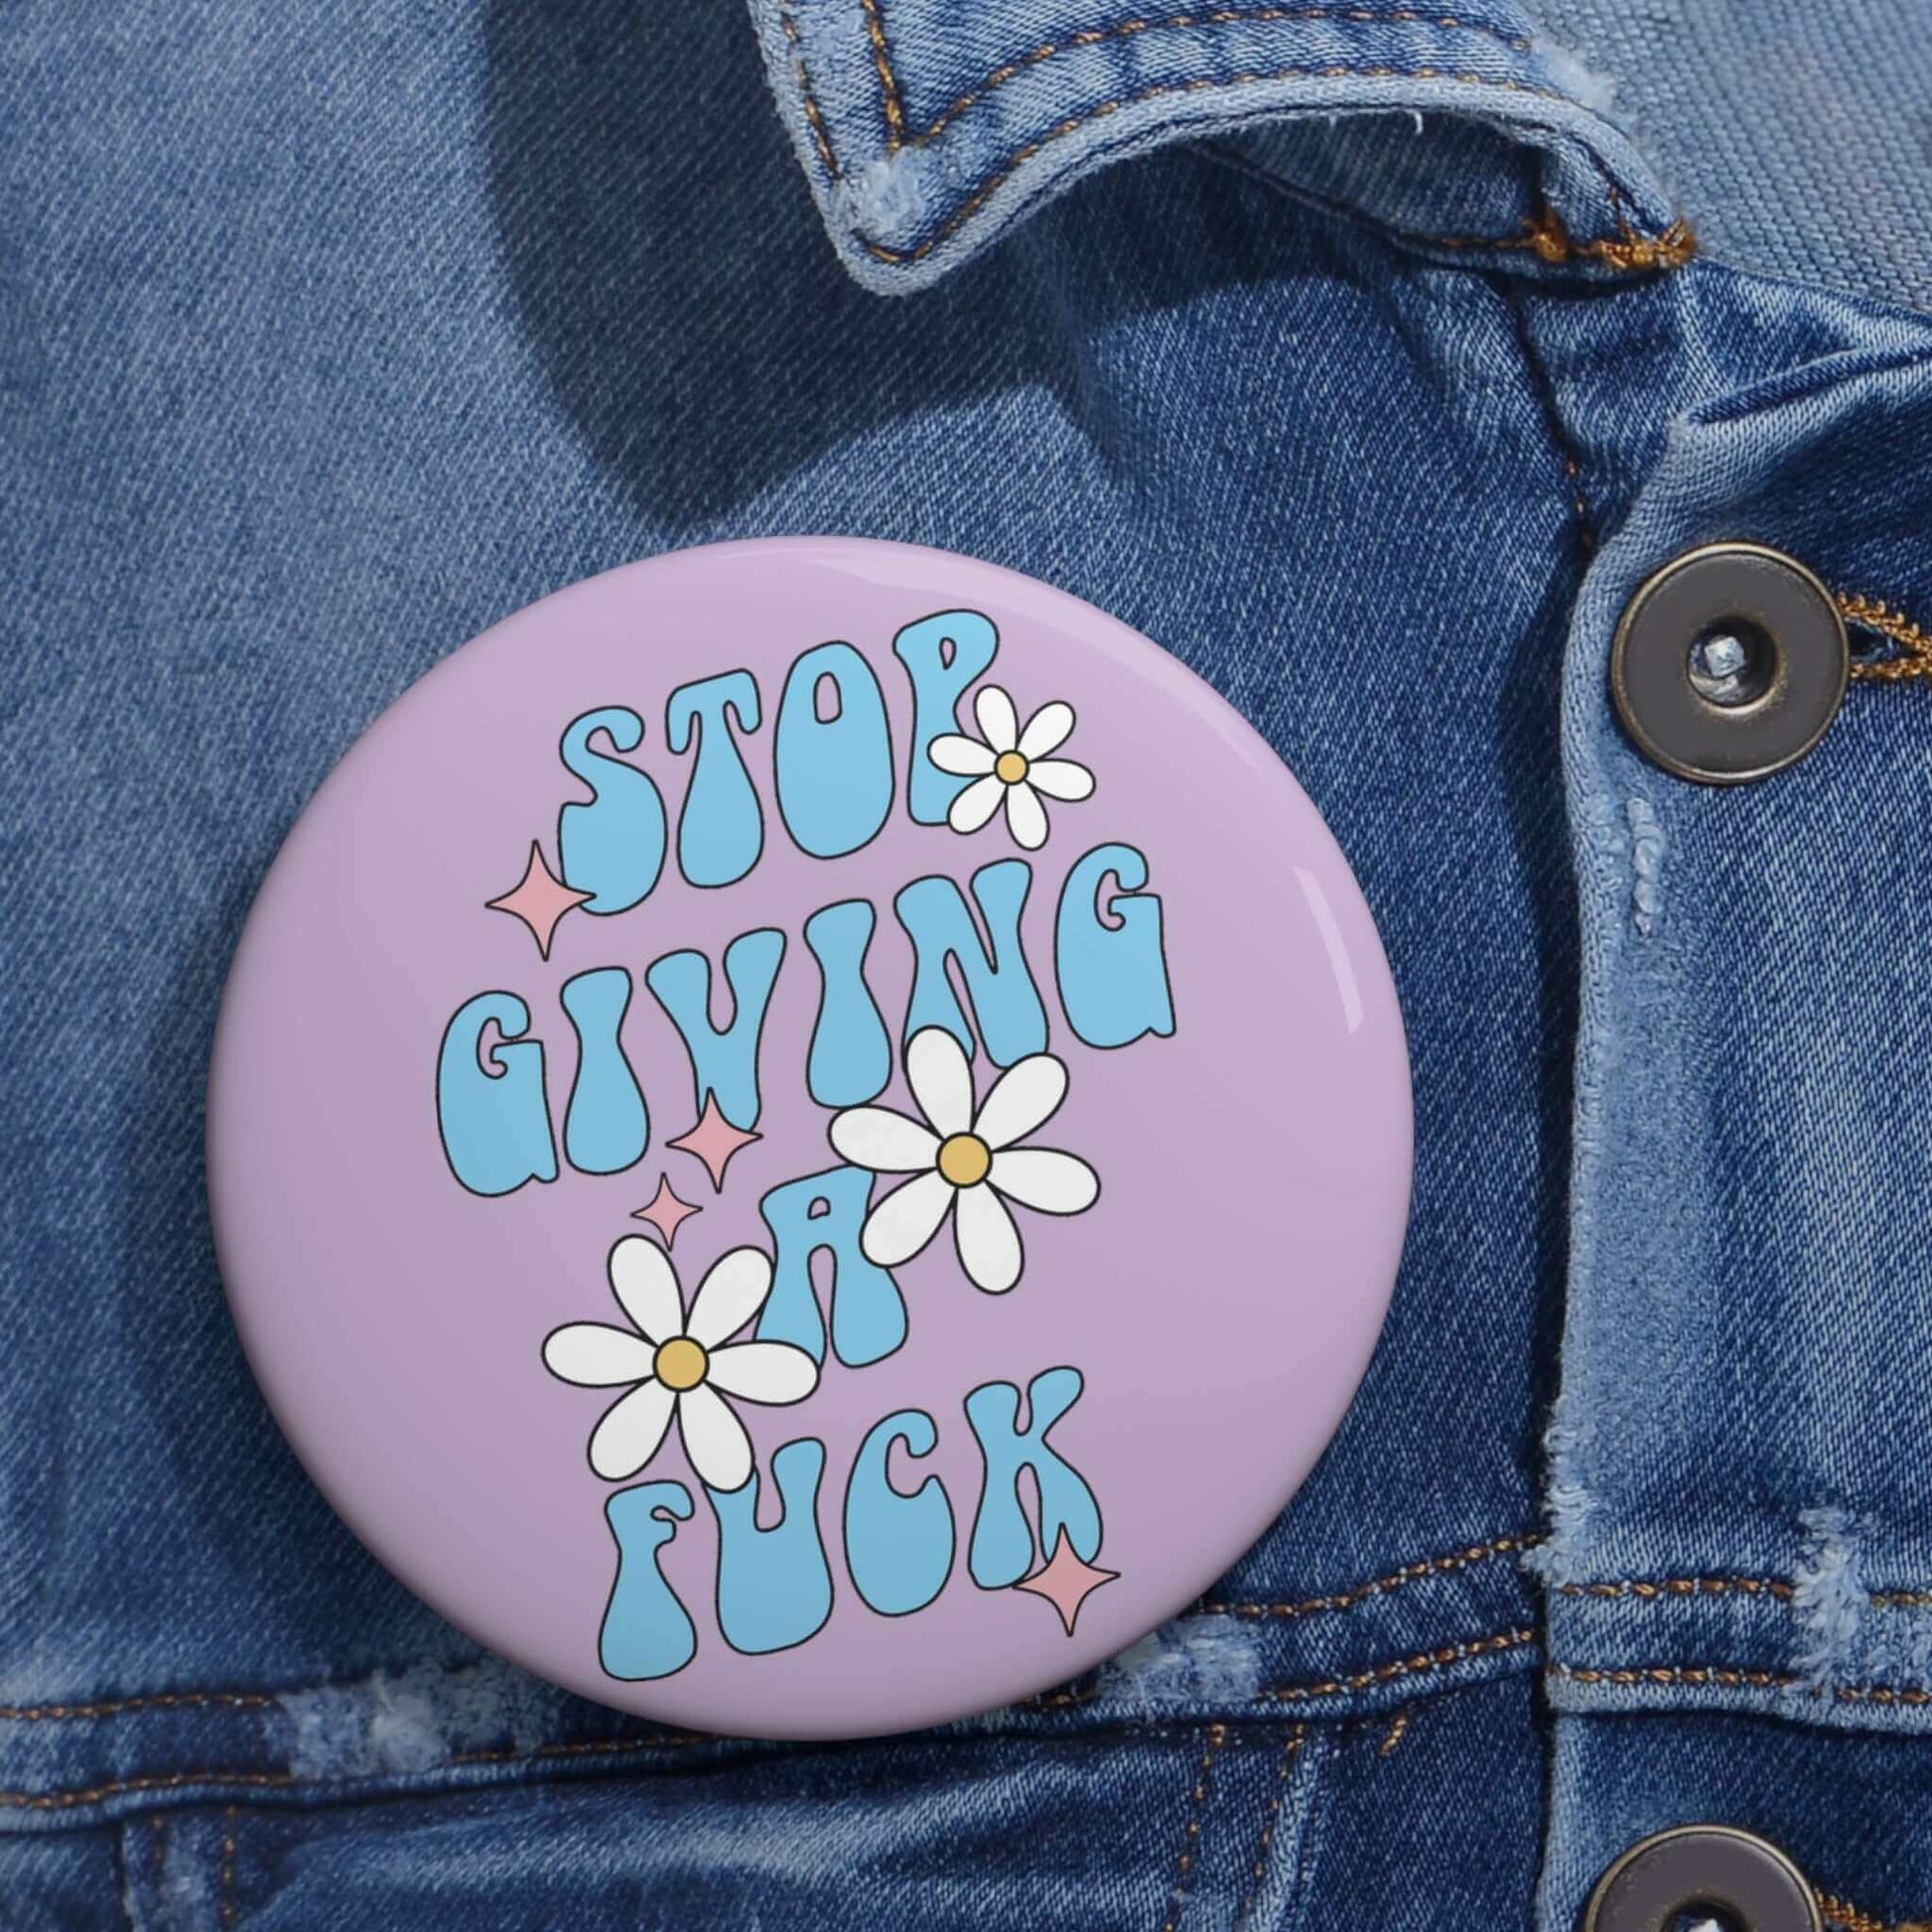 Pinback button that says stop giving a fuck with cute daisy flowers.